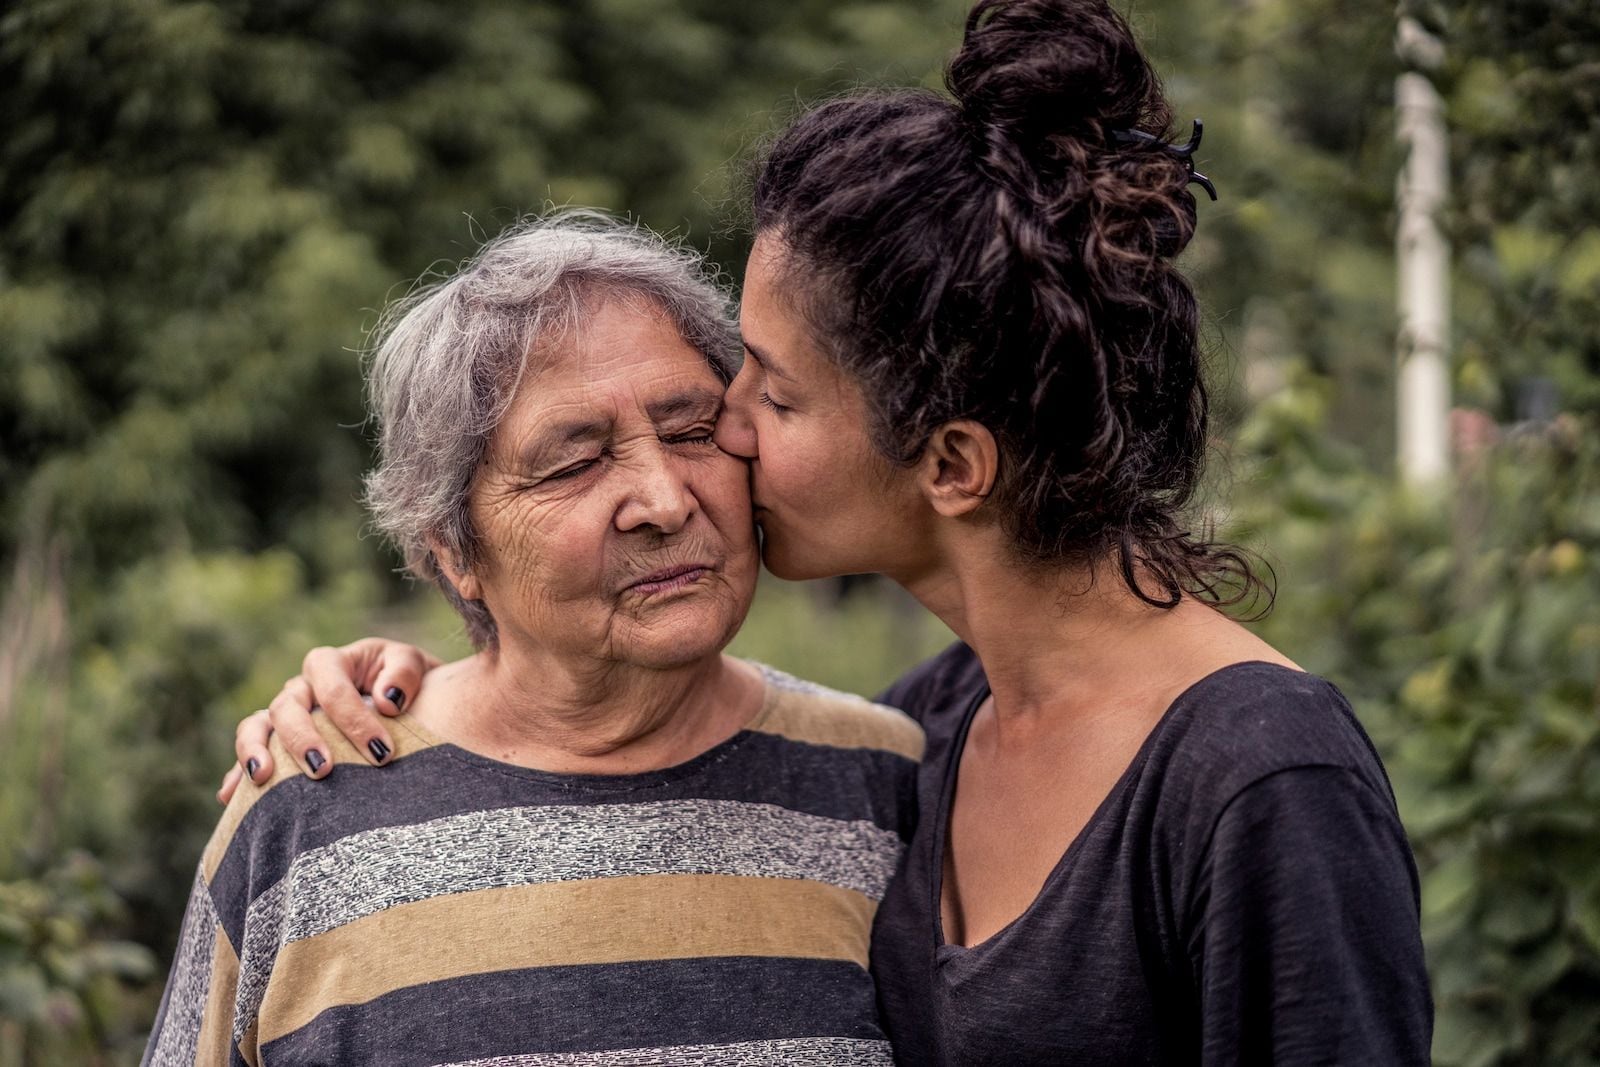 Unique caregiving challenges the Hispanic community faces and what can help